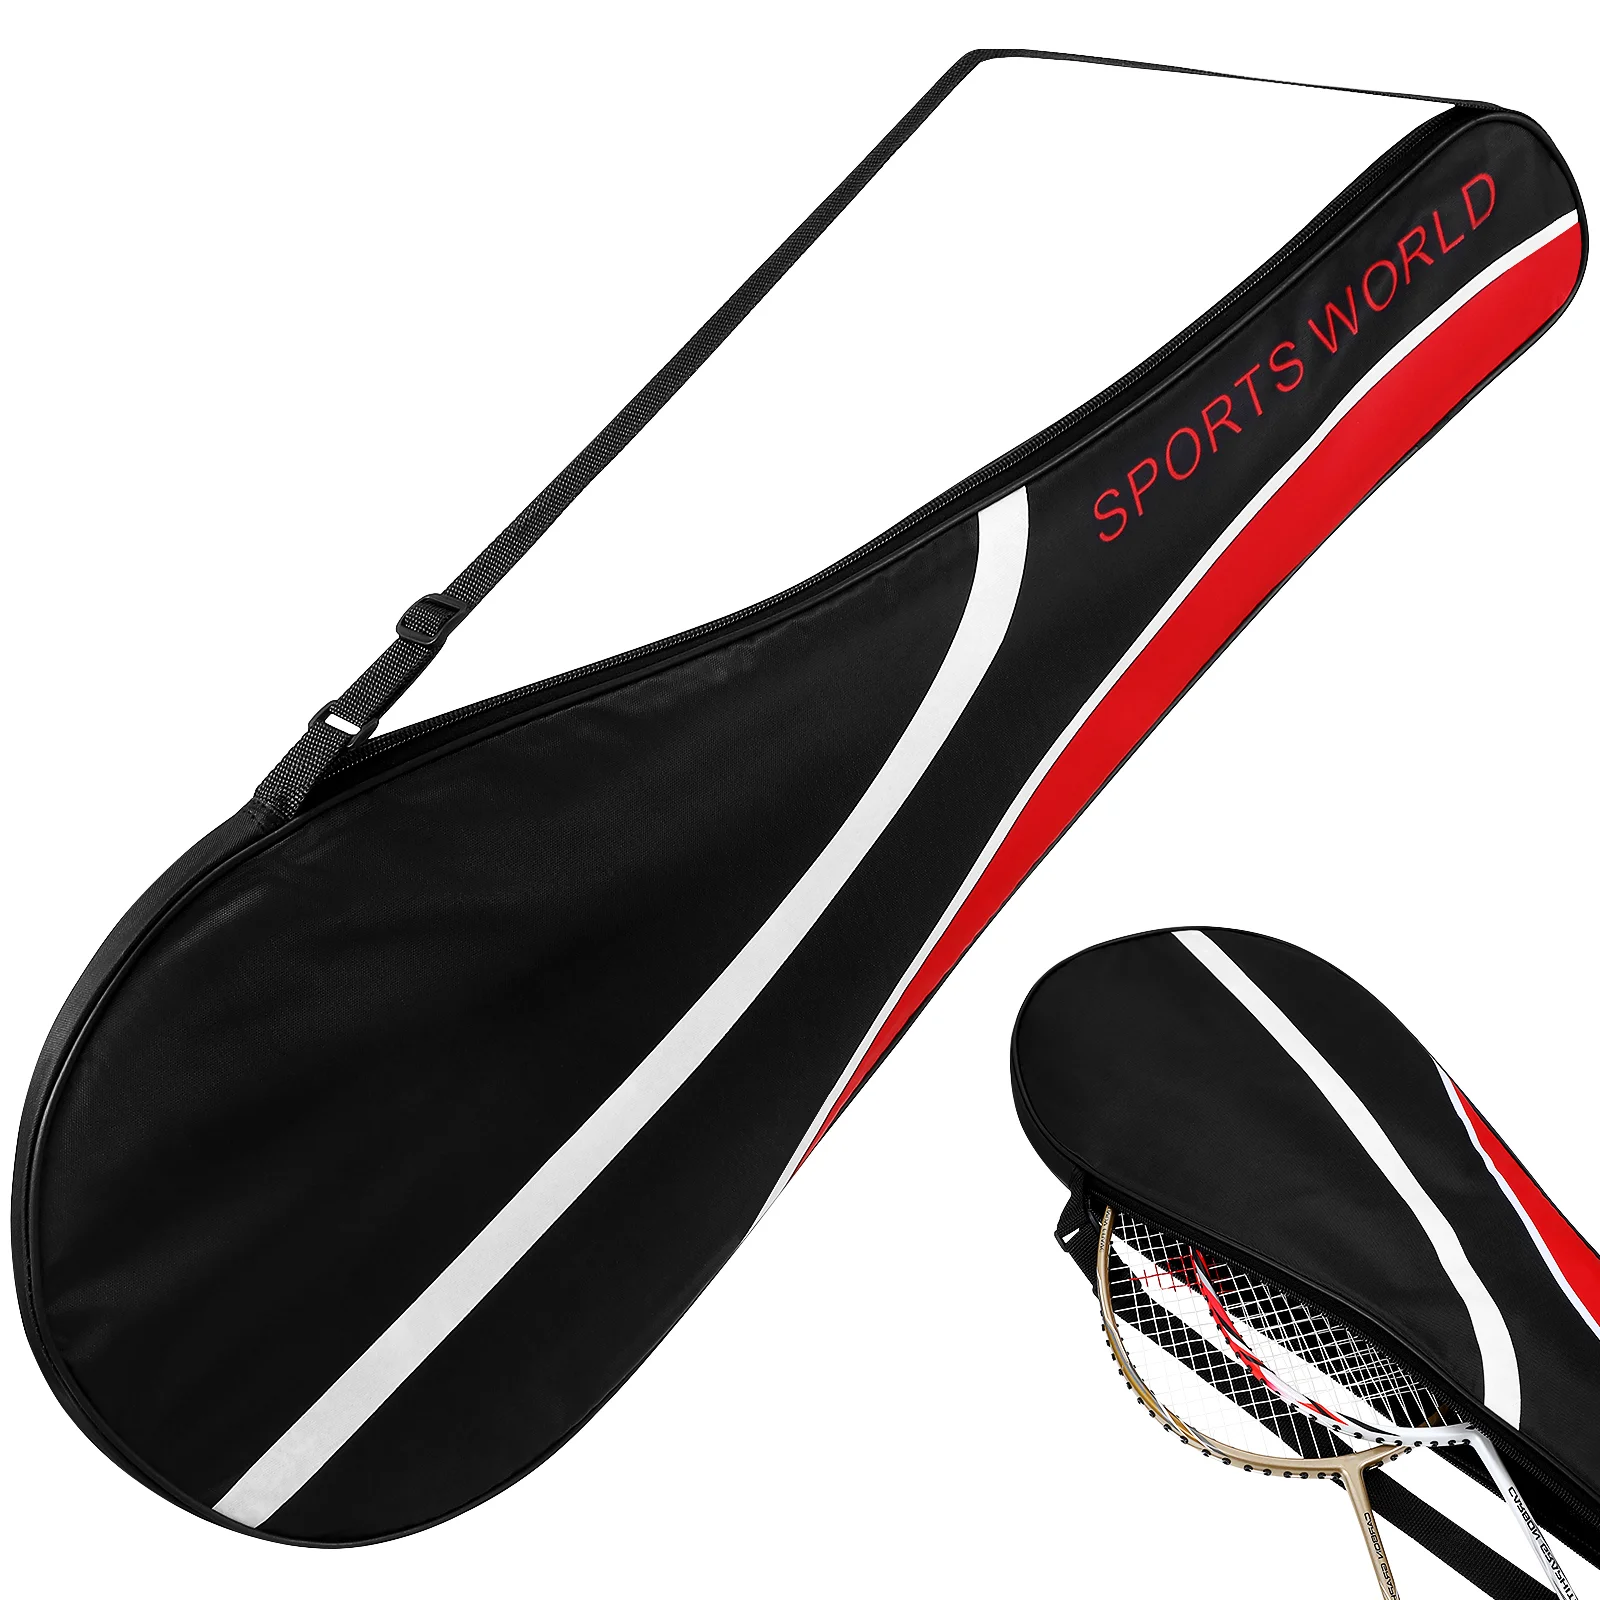 

Badminton Racket Bag Overgrip Tennis for Storage outside with Adjustable Cover Balls Covers Outdoor Backpack